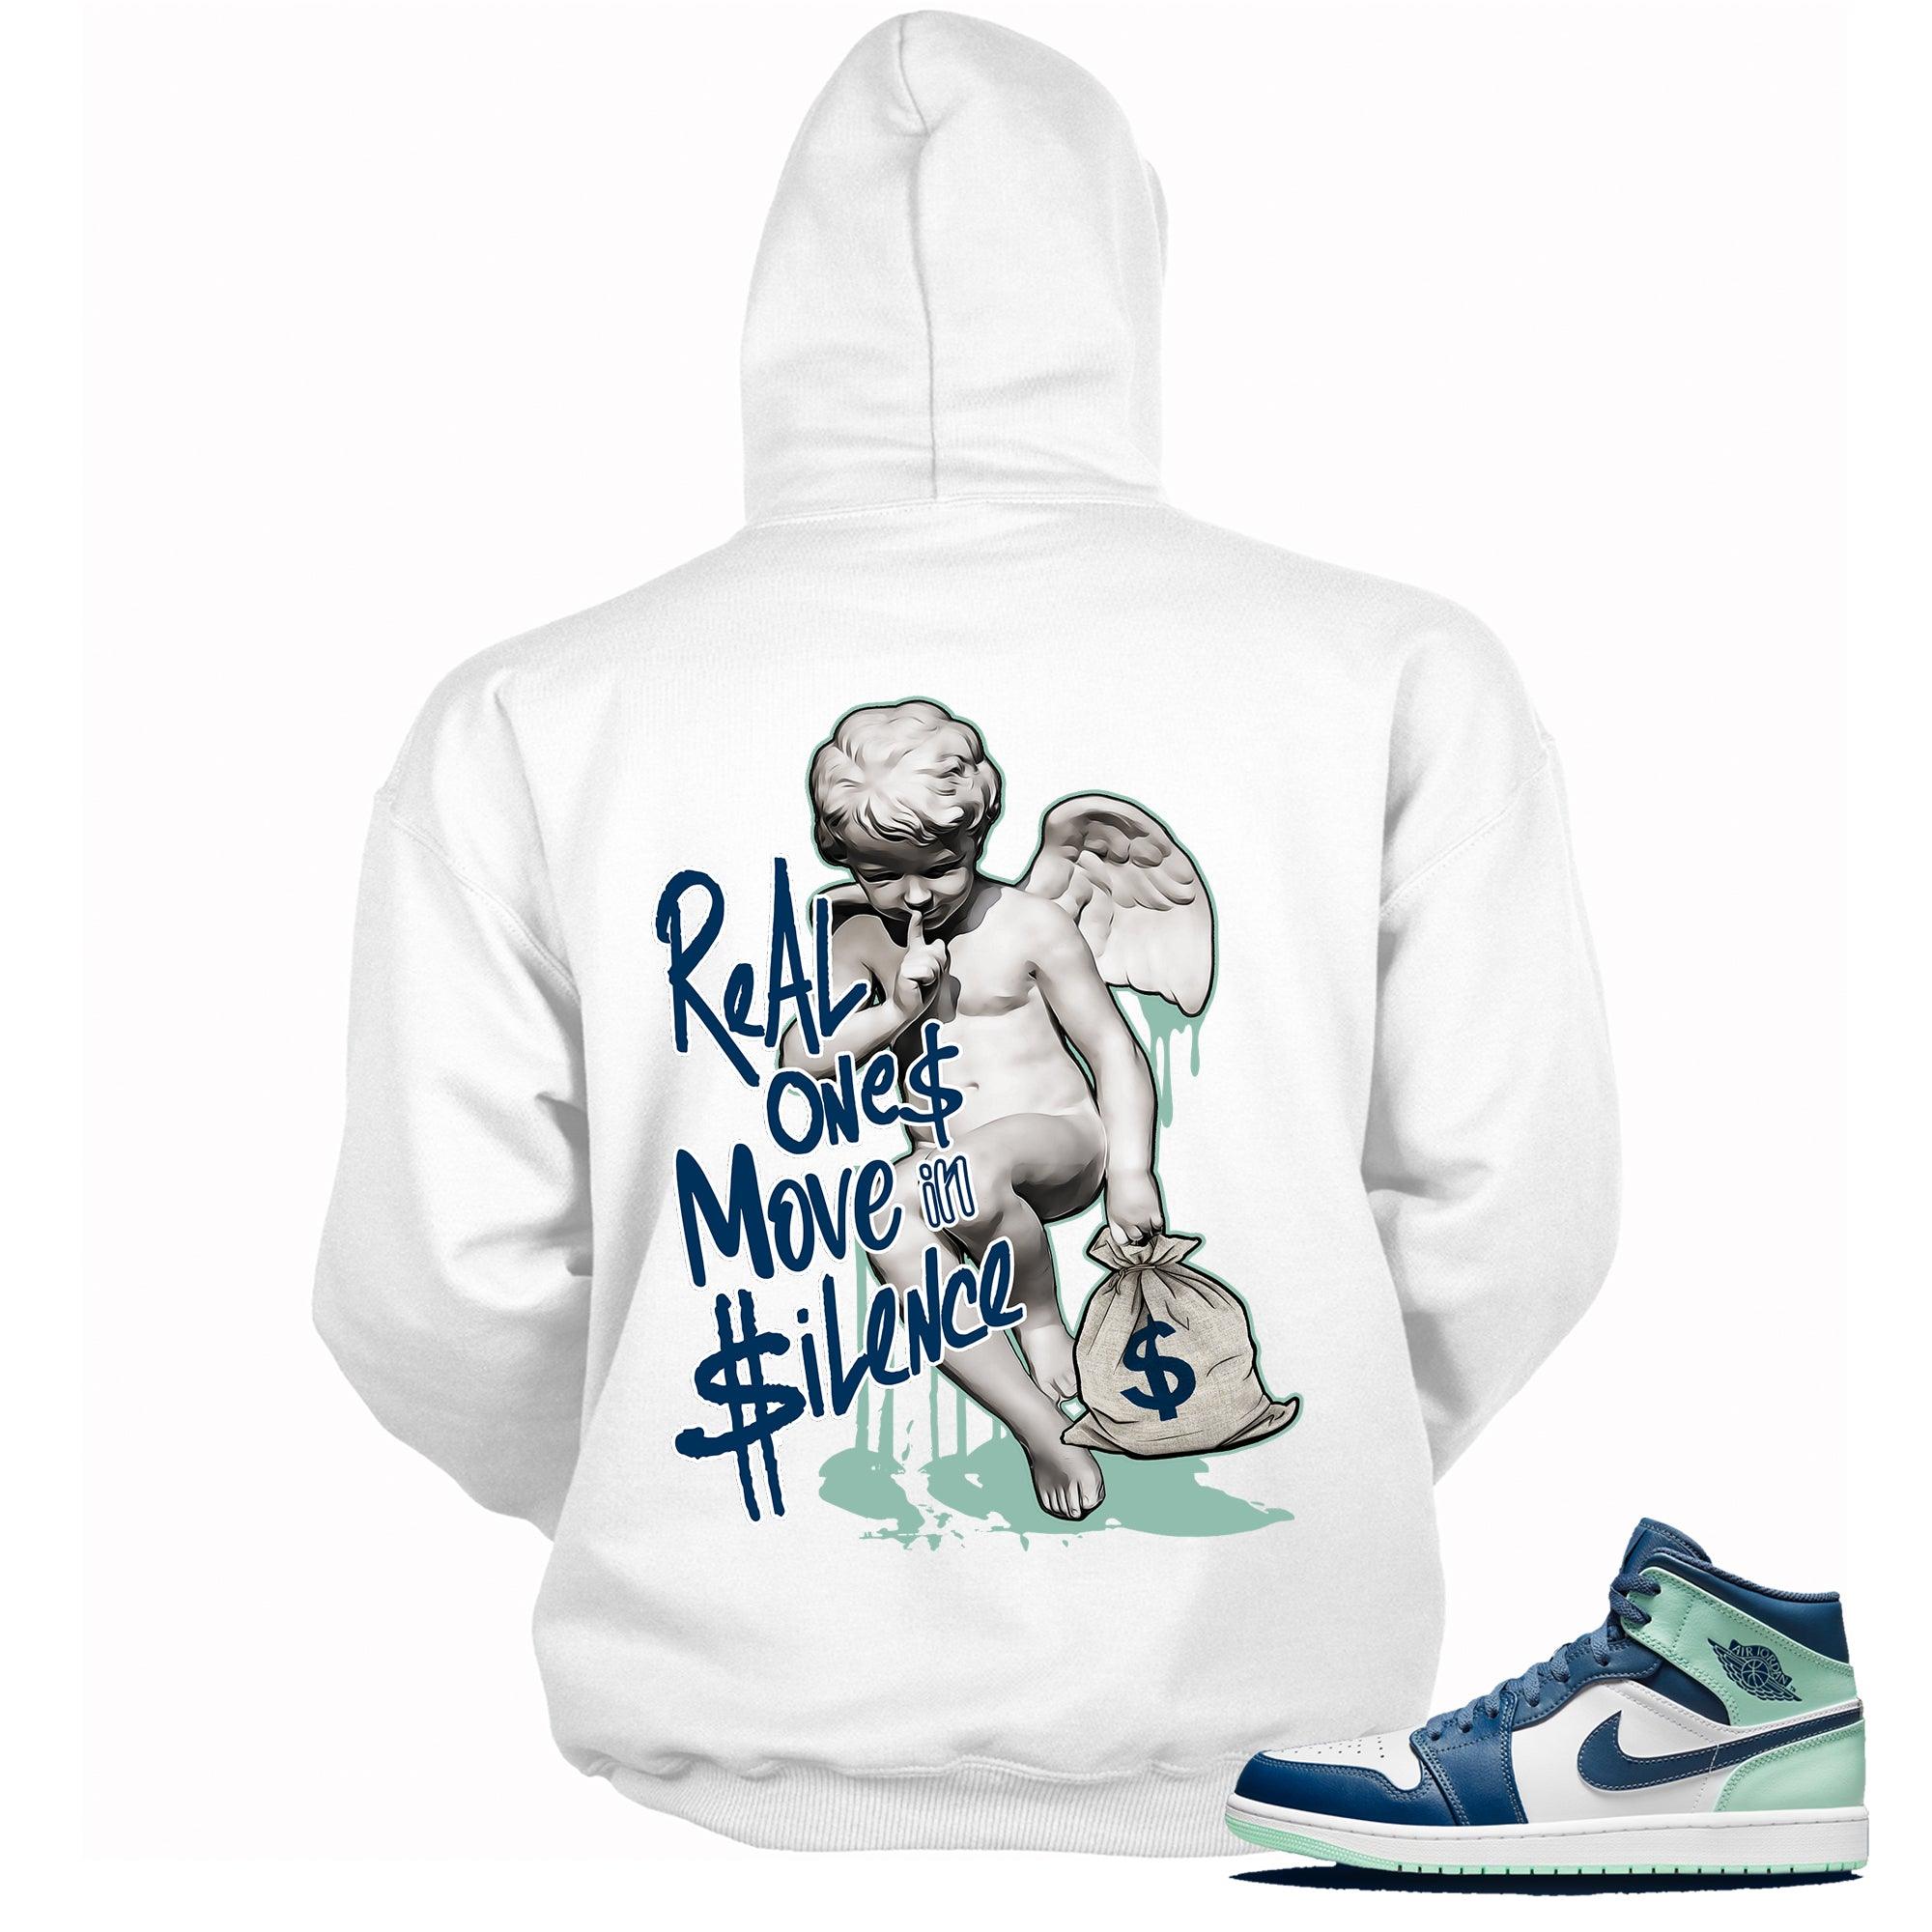 Real Ones Move In Silence Hoodie AJ 1 Mid Mystic Navy Mint Foam photo